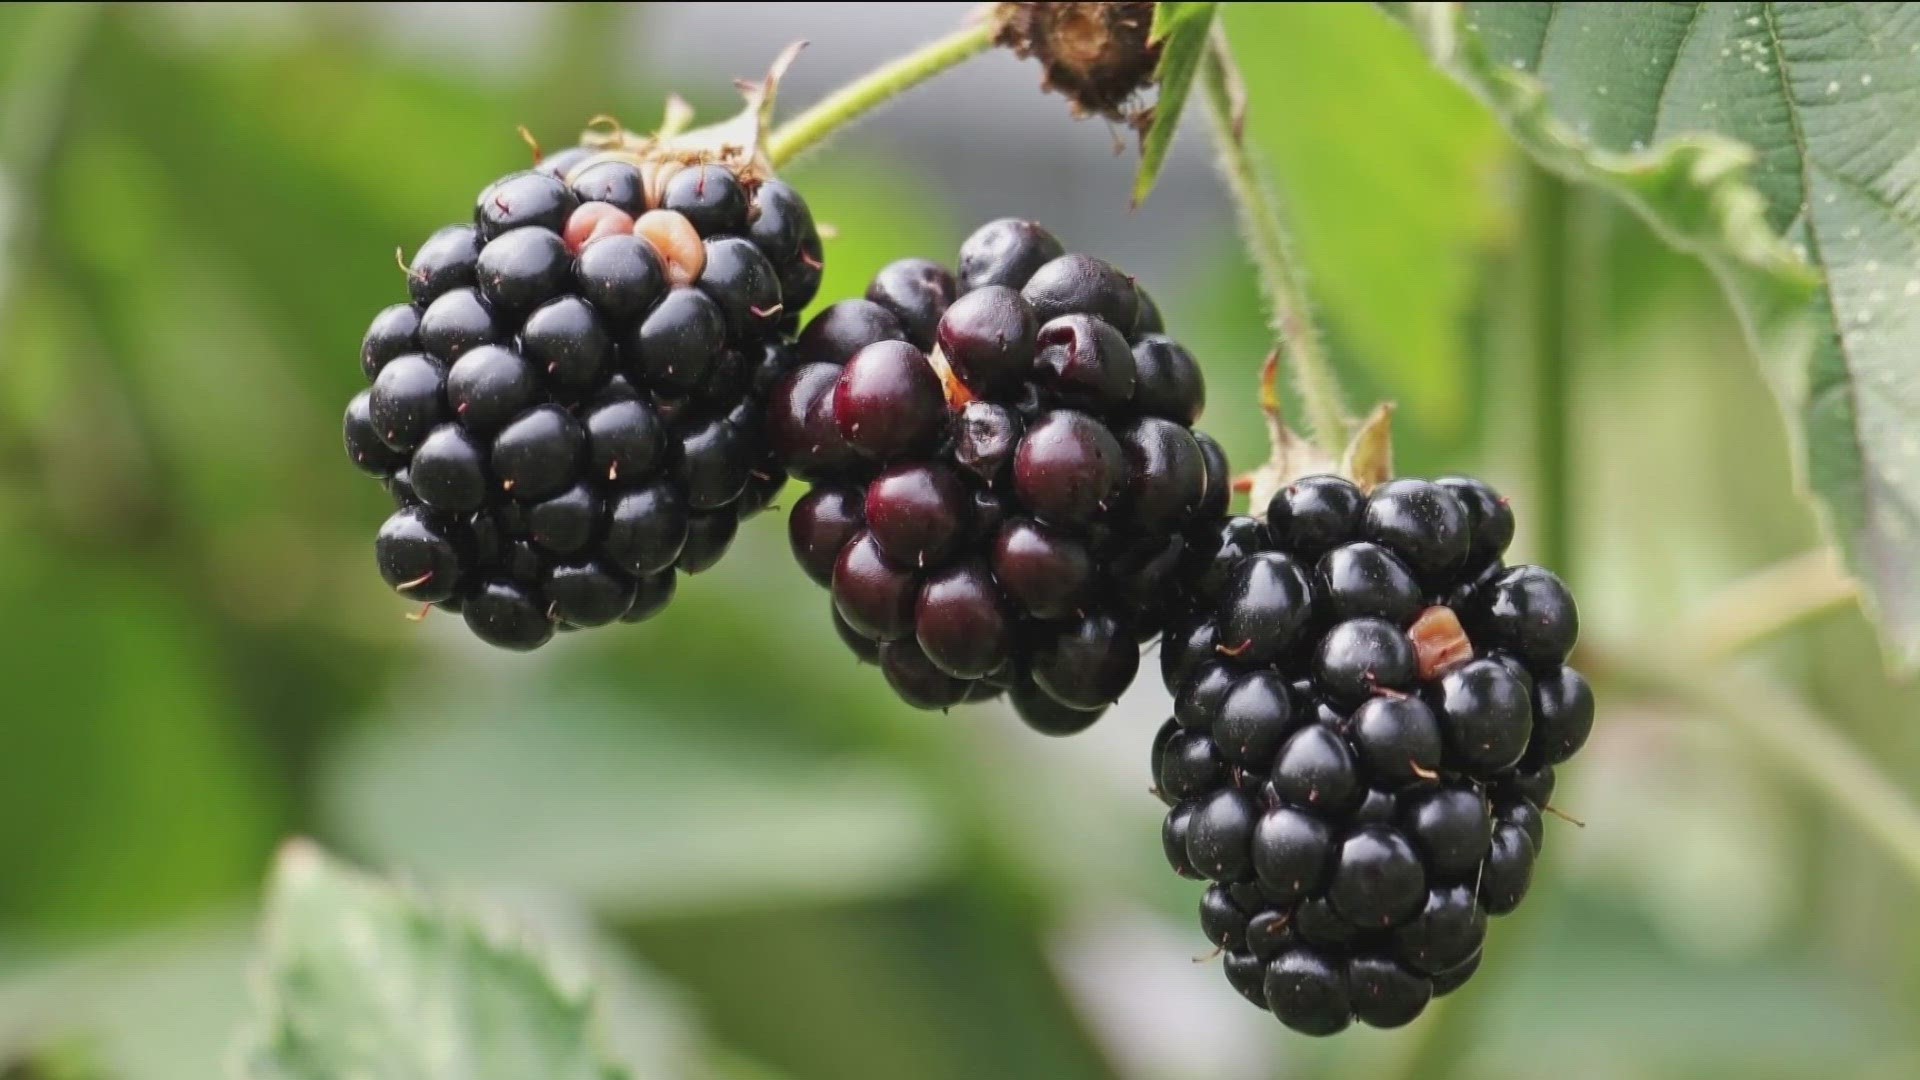 KTVB's Jim Duthie shows off the many different berries that grow wild in Idaho, and a few others you may want to grow in your garden at home.